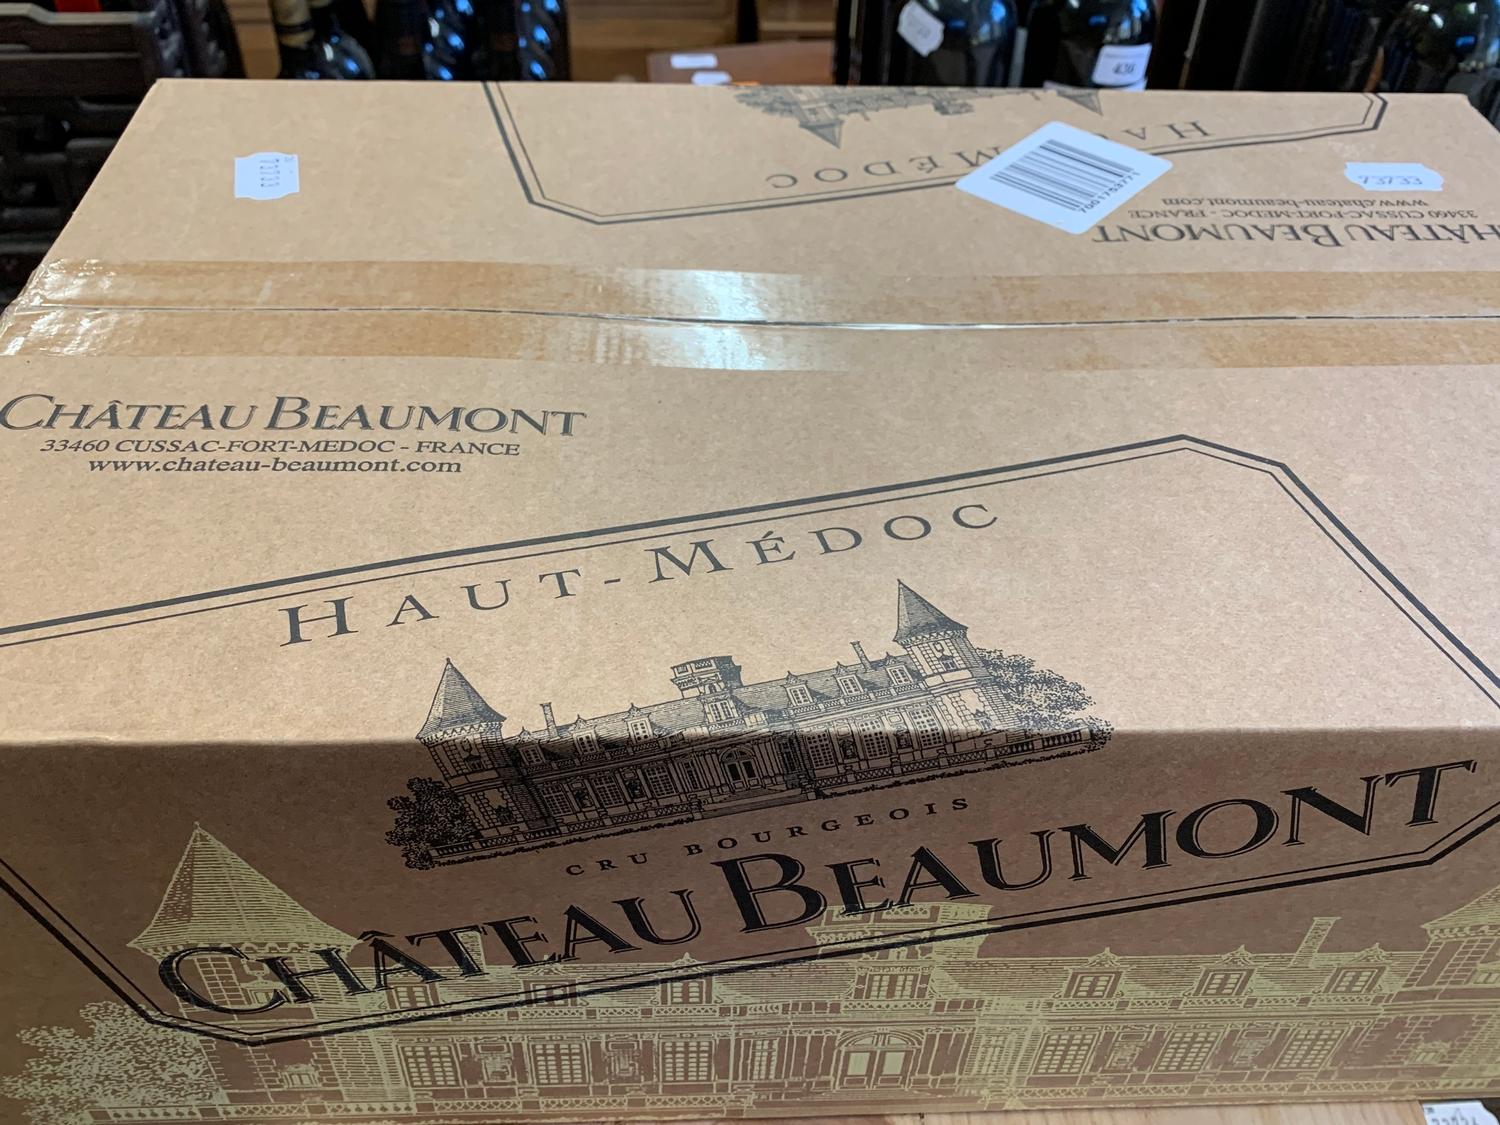 Twelve bottles of Chateau Beaumont Cru Bourgeoise Haut-Medoc, 2010, in cardboard box From a Ferndown - Image 2 of 3